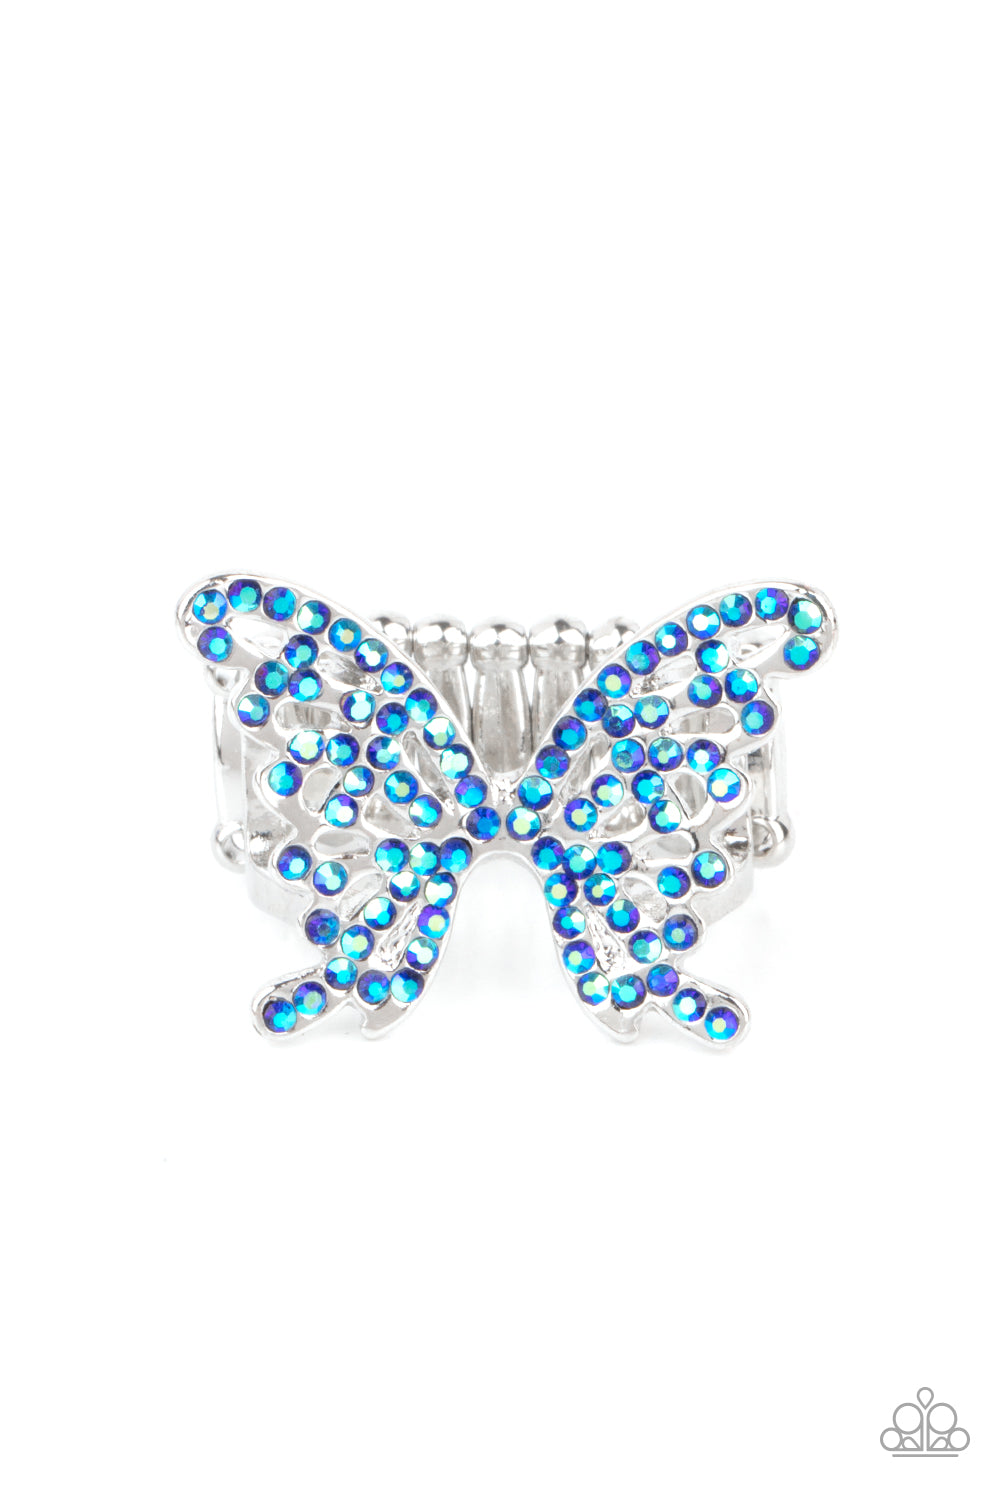 Butterfly Orchard - Blue  1621